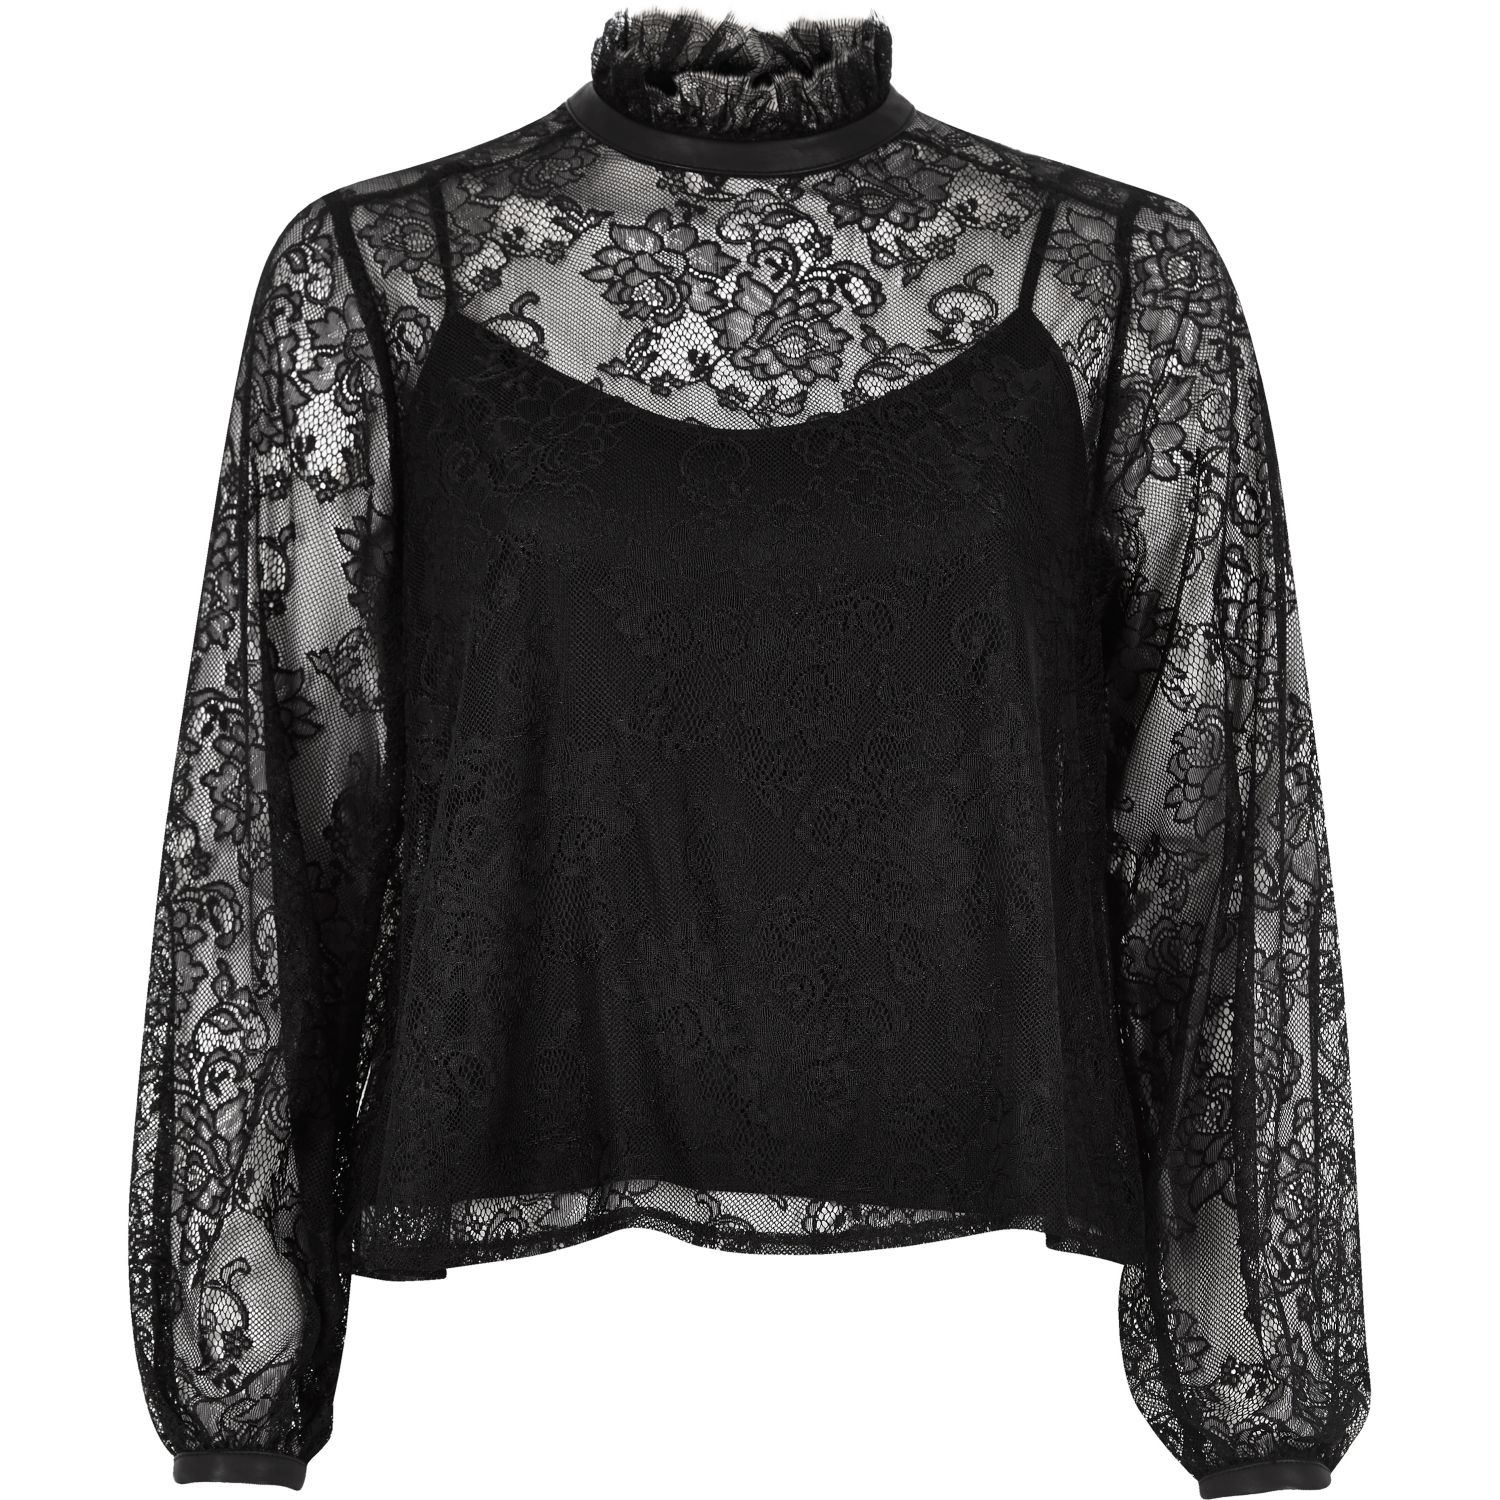 River Island Black Lace Victoriana High Neck Blouse in Black - Lyst